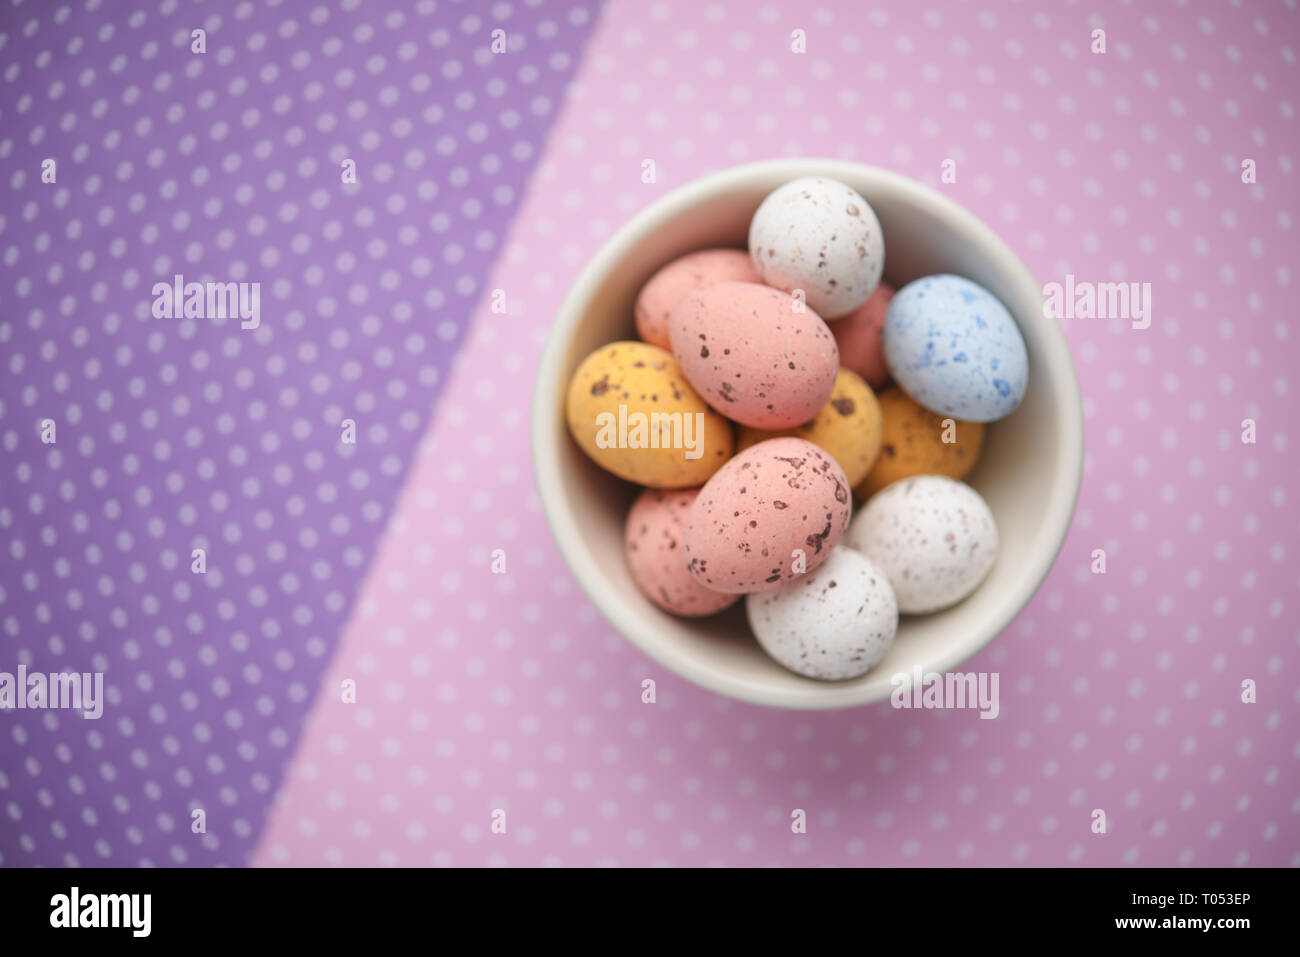 Easter candy egg on colorful background Stock Photo